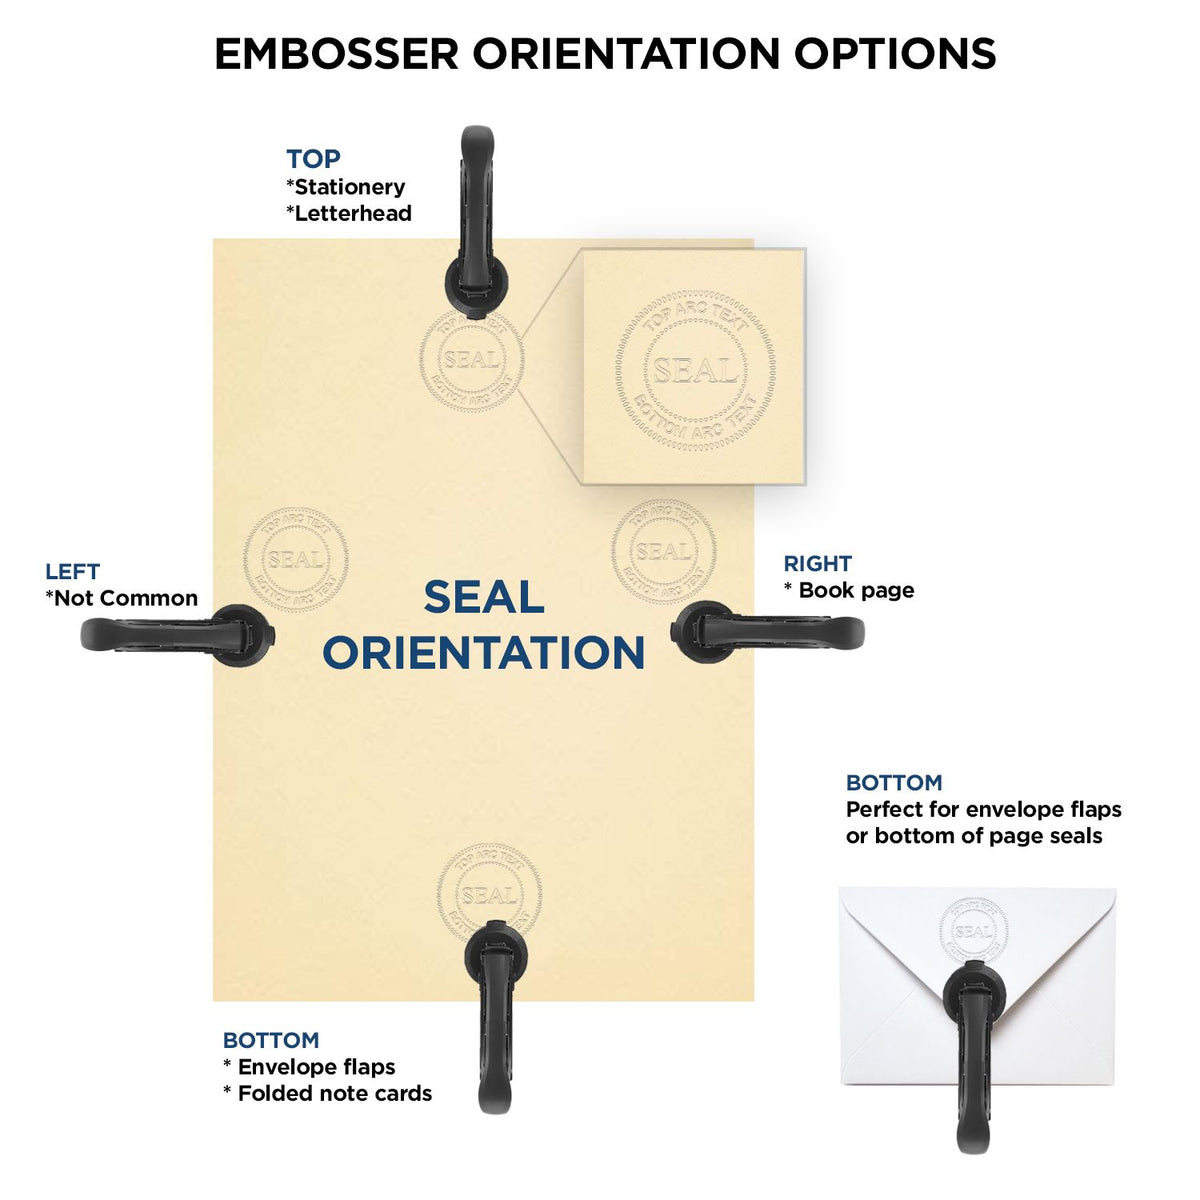 An infographic for the Heavy Duty Cast Iron Hawaii Geologist Seal Embosser showing embosser orientation, this is showing examples of a top, bottom, right and left insert.